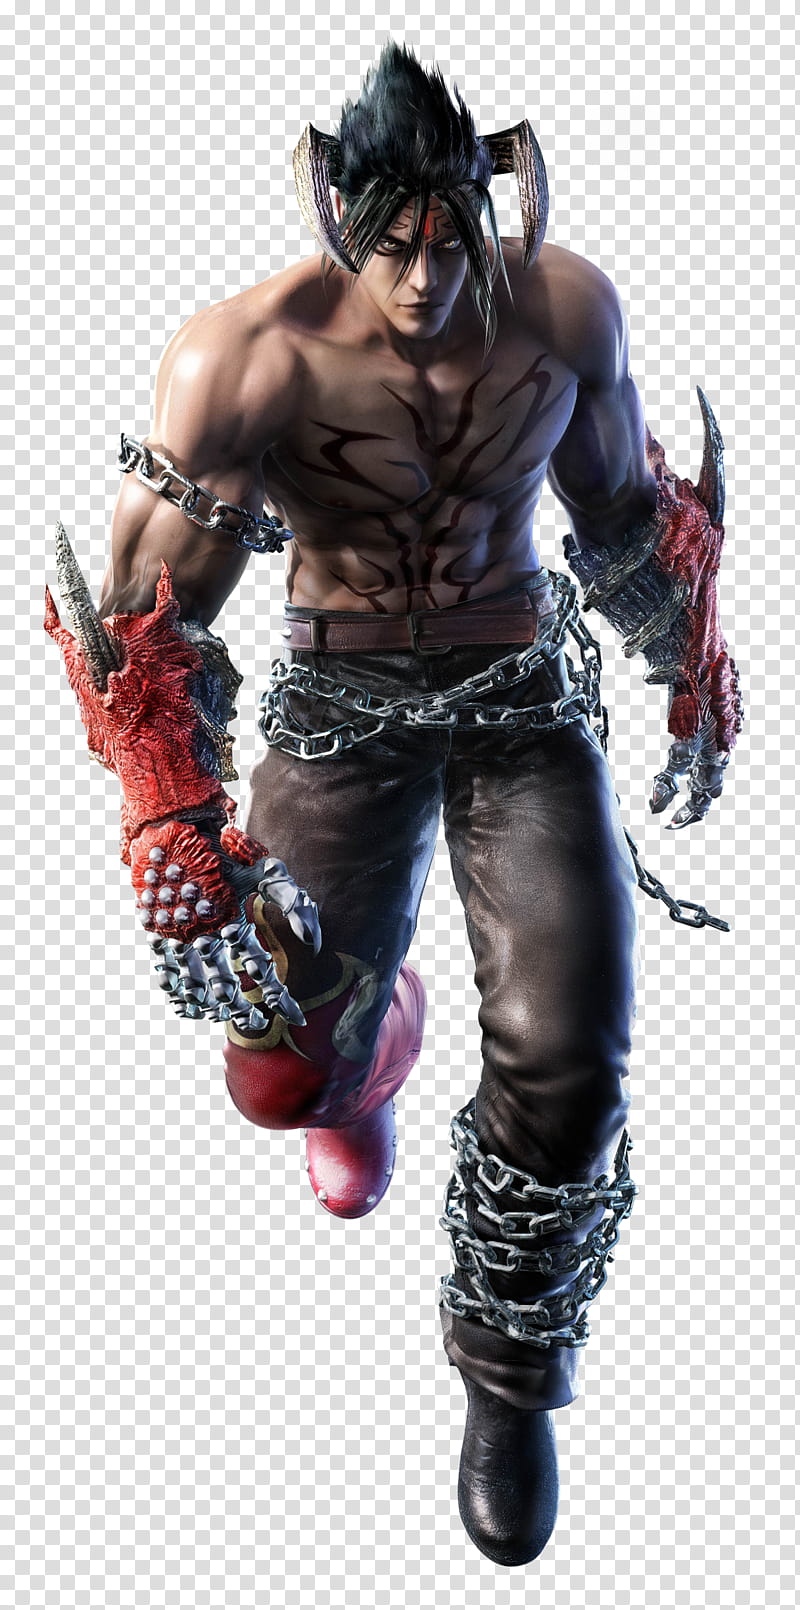 Devil Jin In BR Without Wings, game character illustration transparent background PNG clipart